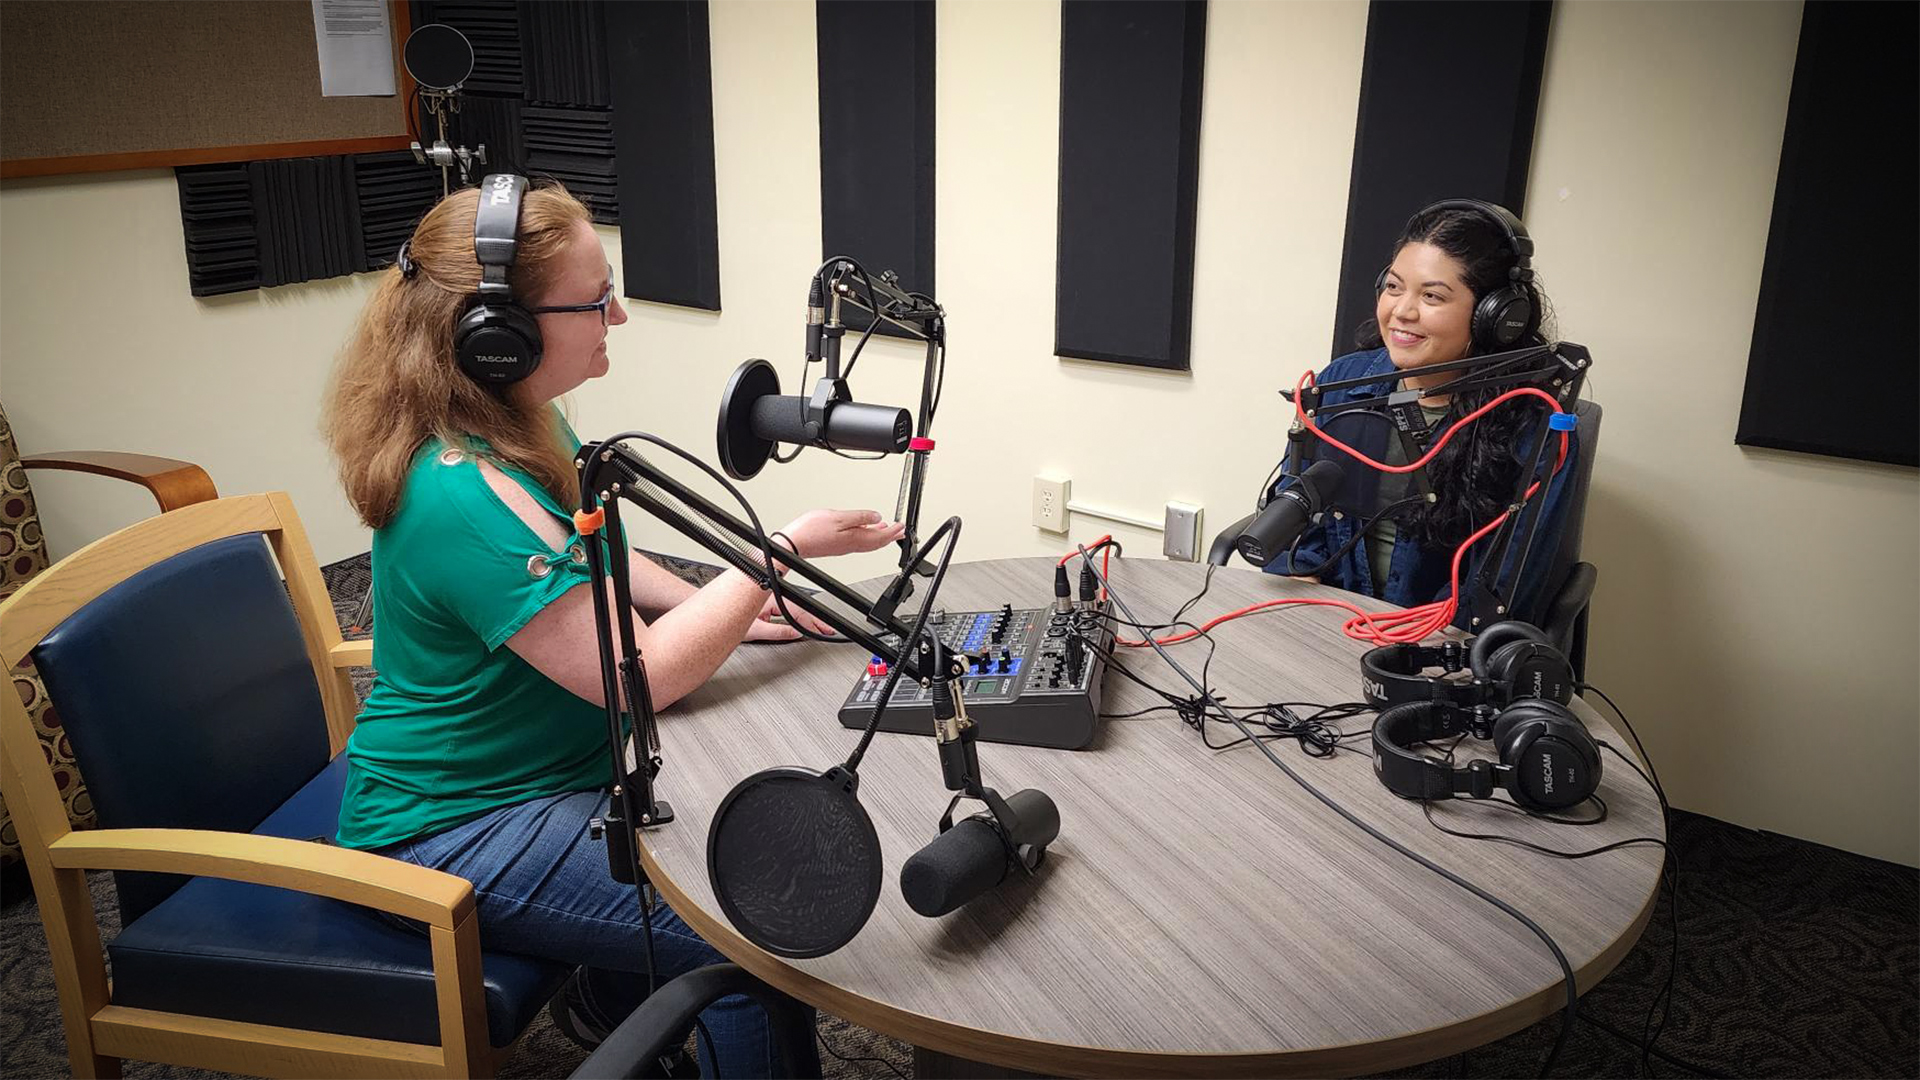 Two women recording in a podcast studio in front of microphones